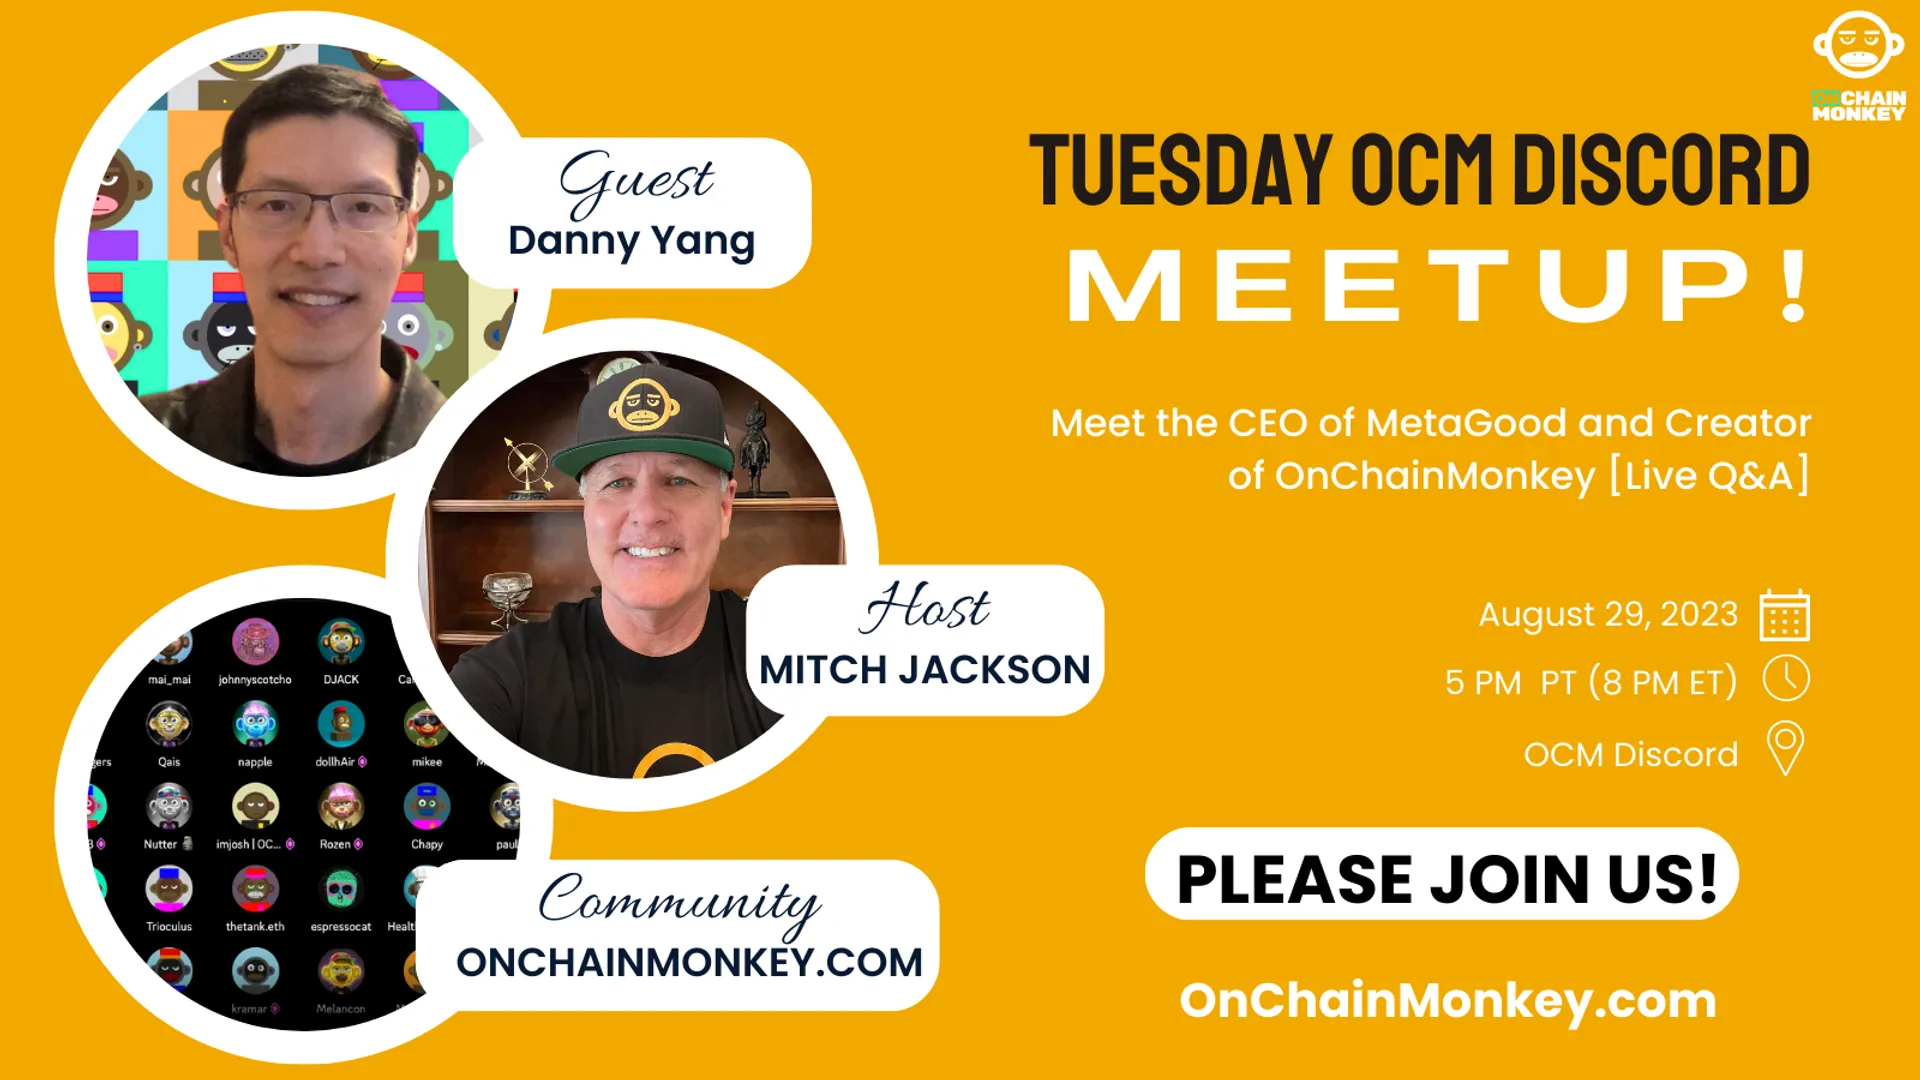 🔥Tuesday Night OCM Weekly Discord Meetup🔥

Please join us for live Q&A with Danny Yang, the CEO of MetaGood and Creator of OnChainMonkey!

What got Danny interested in technology? What is his vision for the future of OCM?

We’ll be hitting the “go live” button in the OCM Discord at 5 pm PT (8 pm ET) on Tuesday, August 29, 2023.